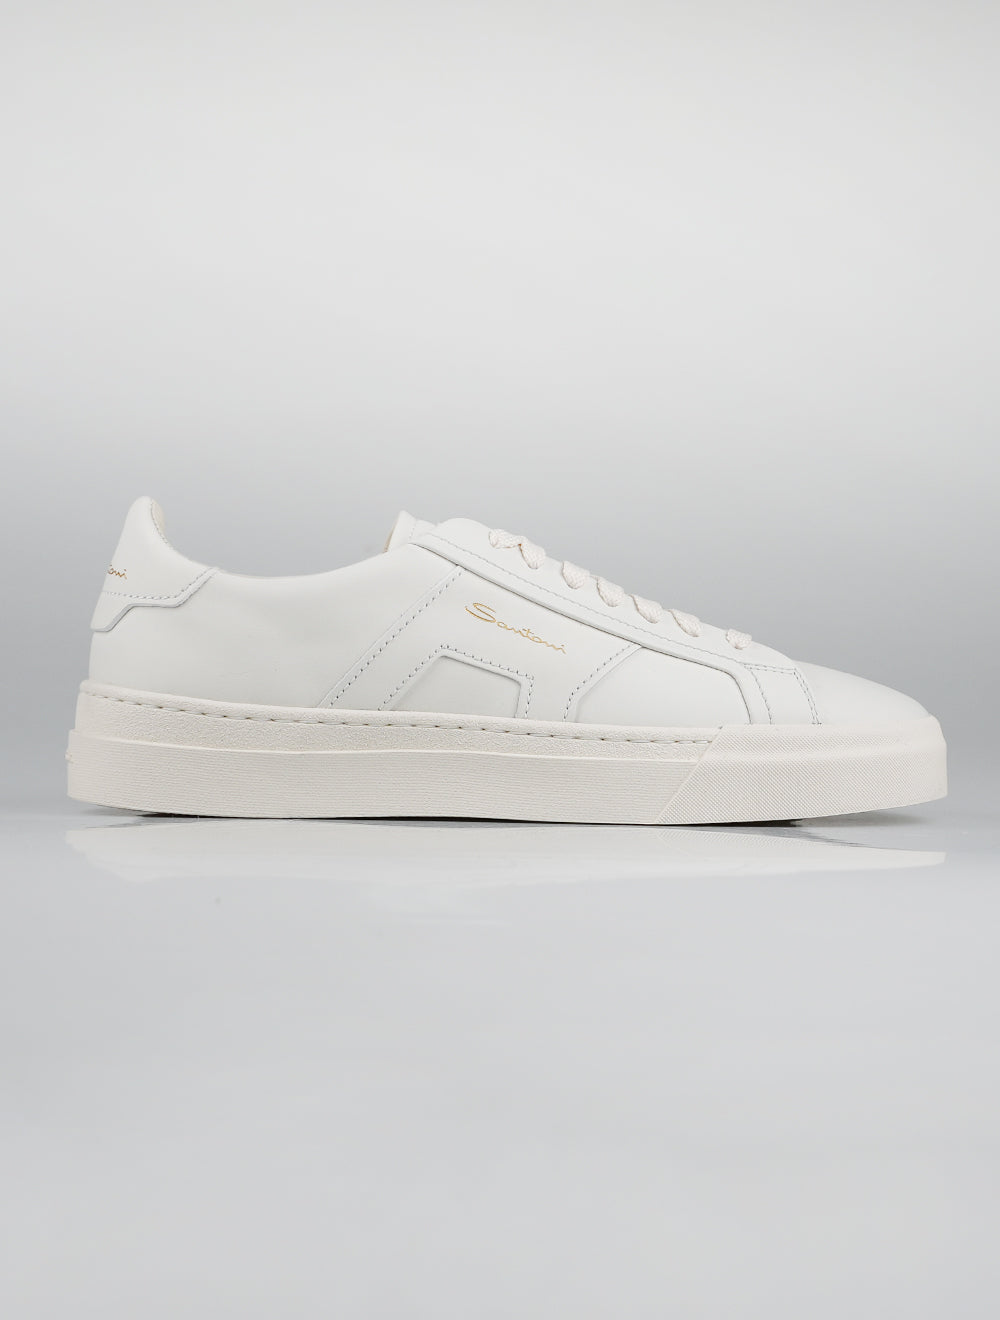 Adidas Continental 80 White leather Sneaker Shoes for Women Comfort and  Style | eBay